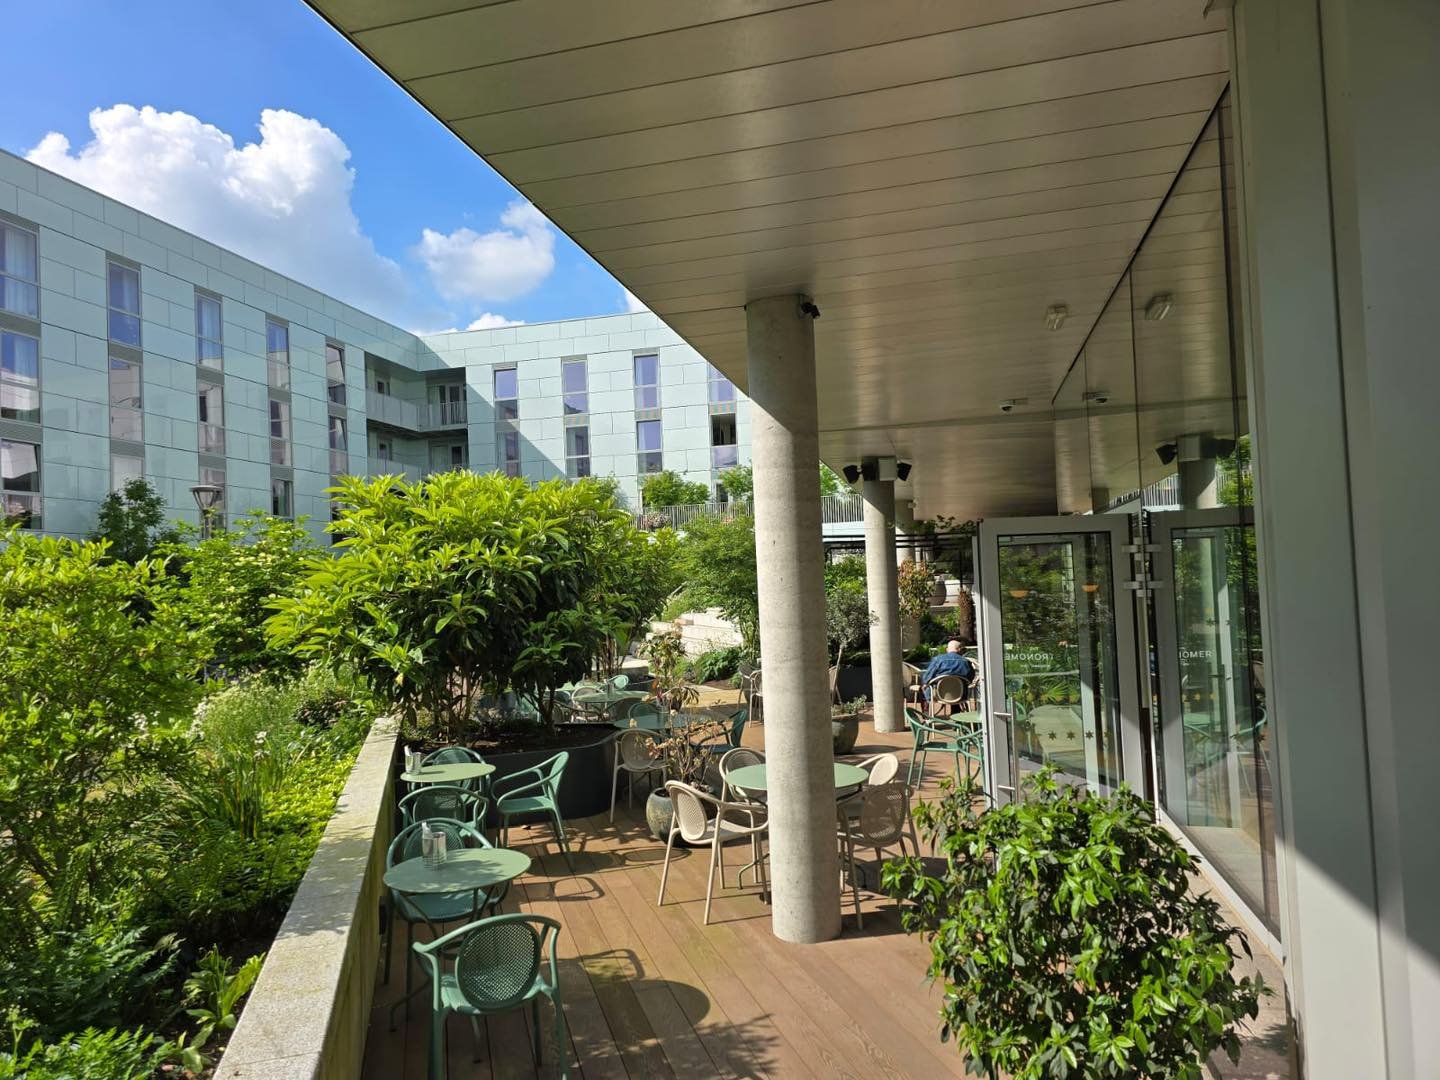 Join us on the terrace 🍺

This weekend sees the annual Eddington Beer Garden pop up in the town square. Make a weekend of it with a bite to eat and a drink on our terrace, followed by drinks and live music at the Beer Garden. 

Eddington Events Eddi